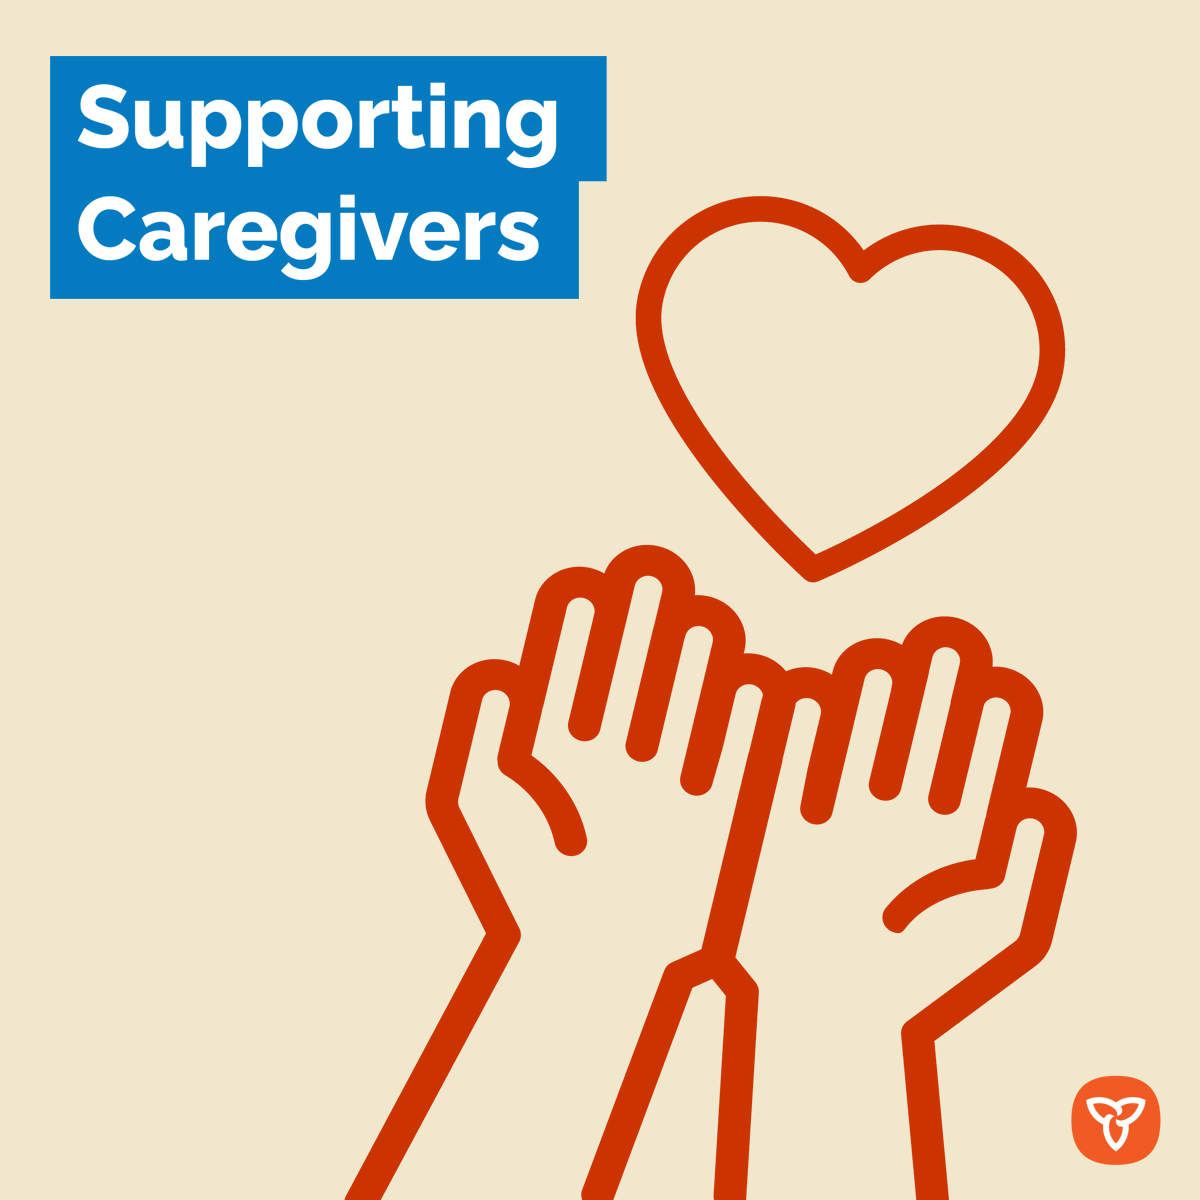 Do you or someone you know help care for a family member, neighbour, or a friend? #Caregivers can get help by connecting with peer supports and resources related to mental health and well-being through the Ontario Caregiver. ontariocaregiver.ca